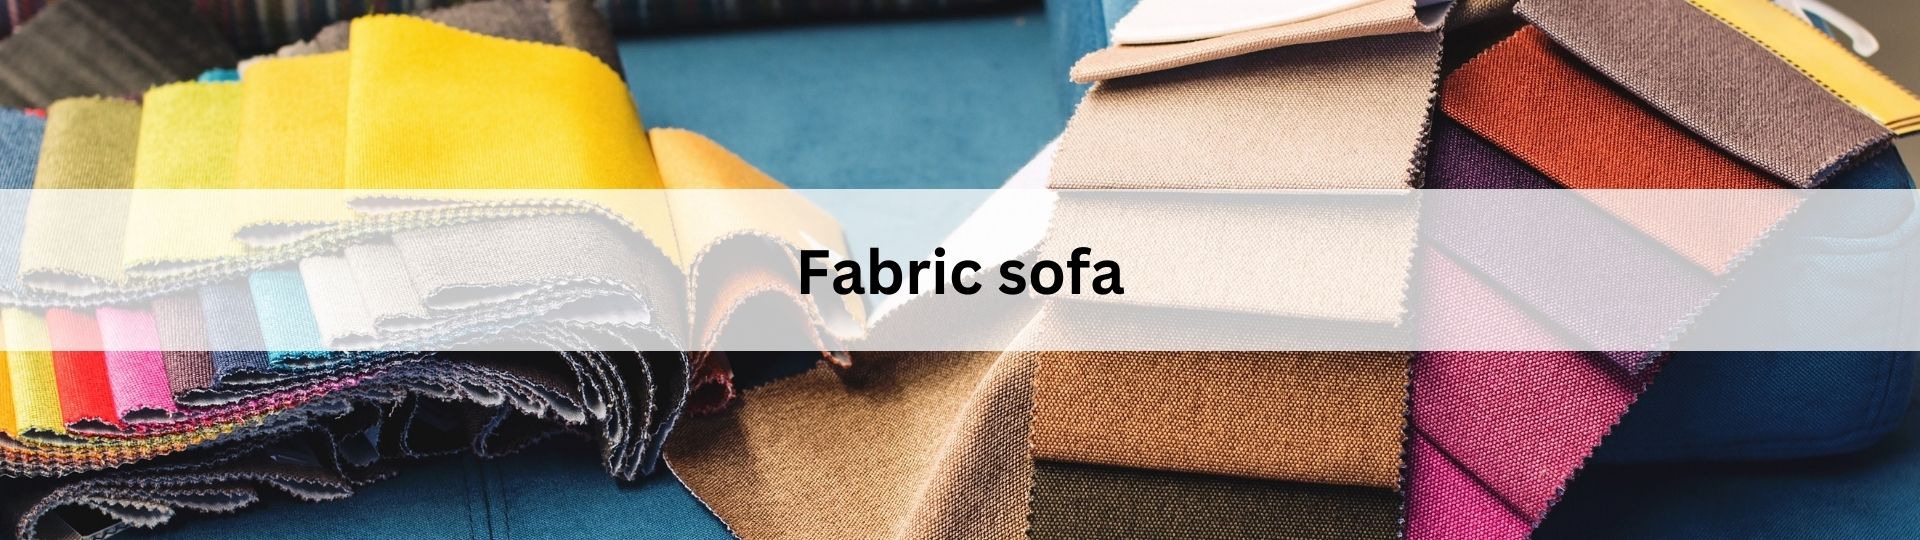 FABRIC SOFA COLLECTIONS